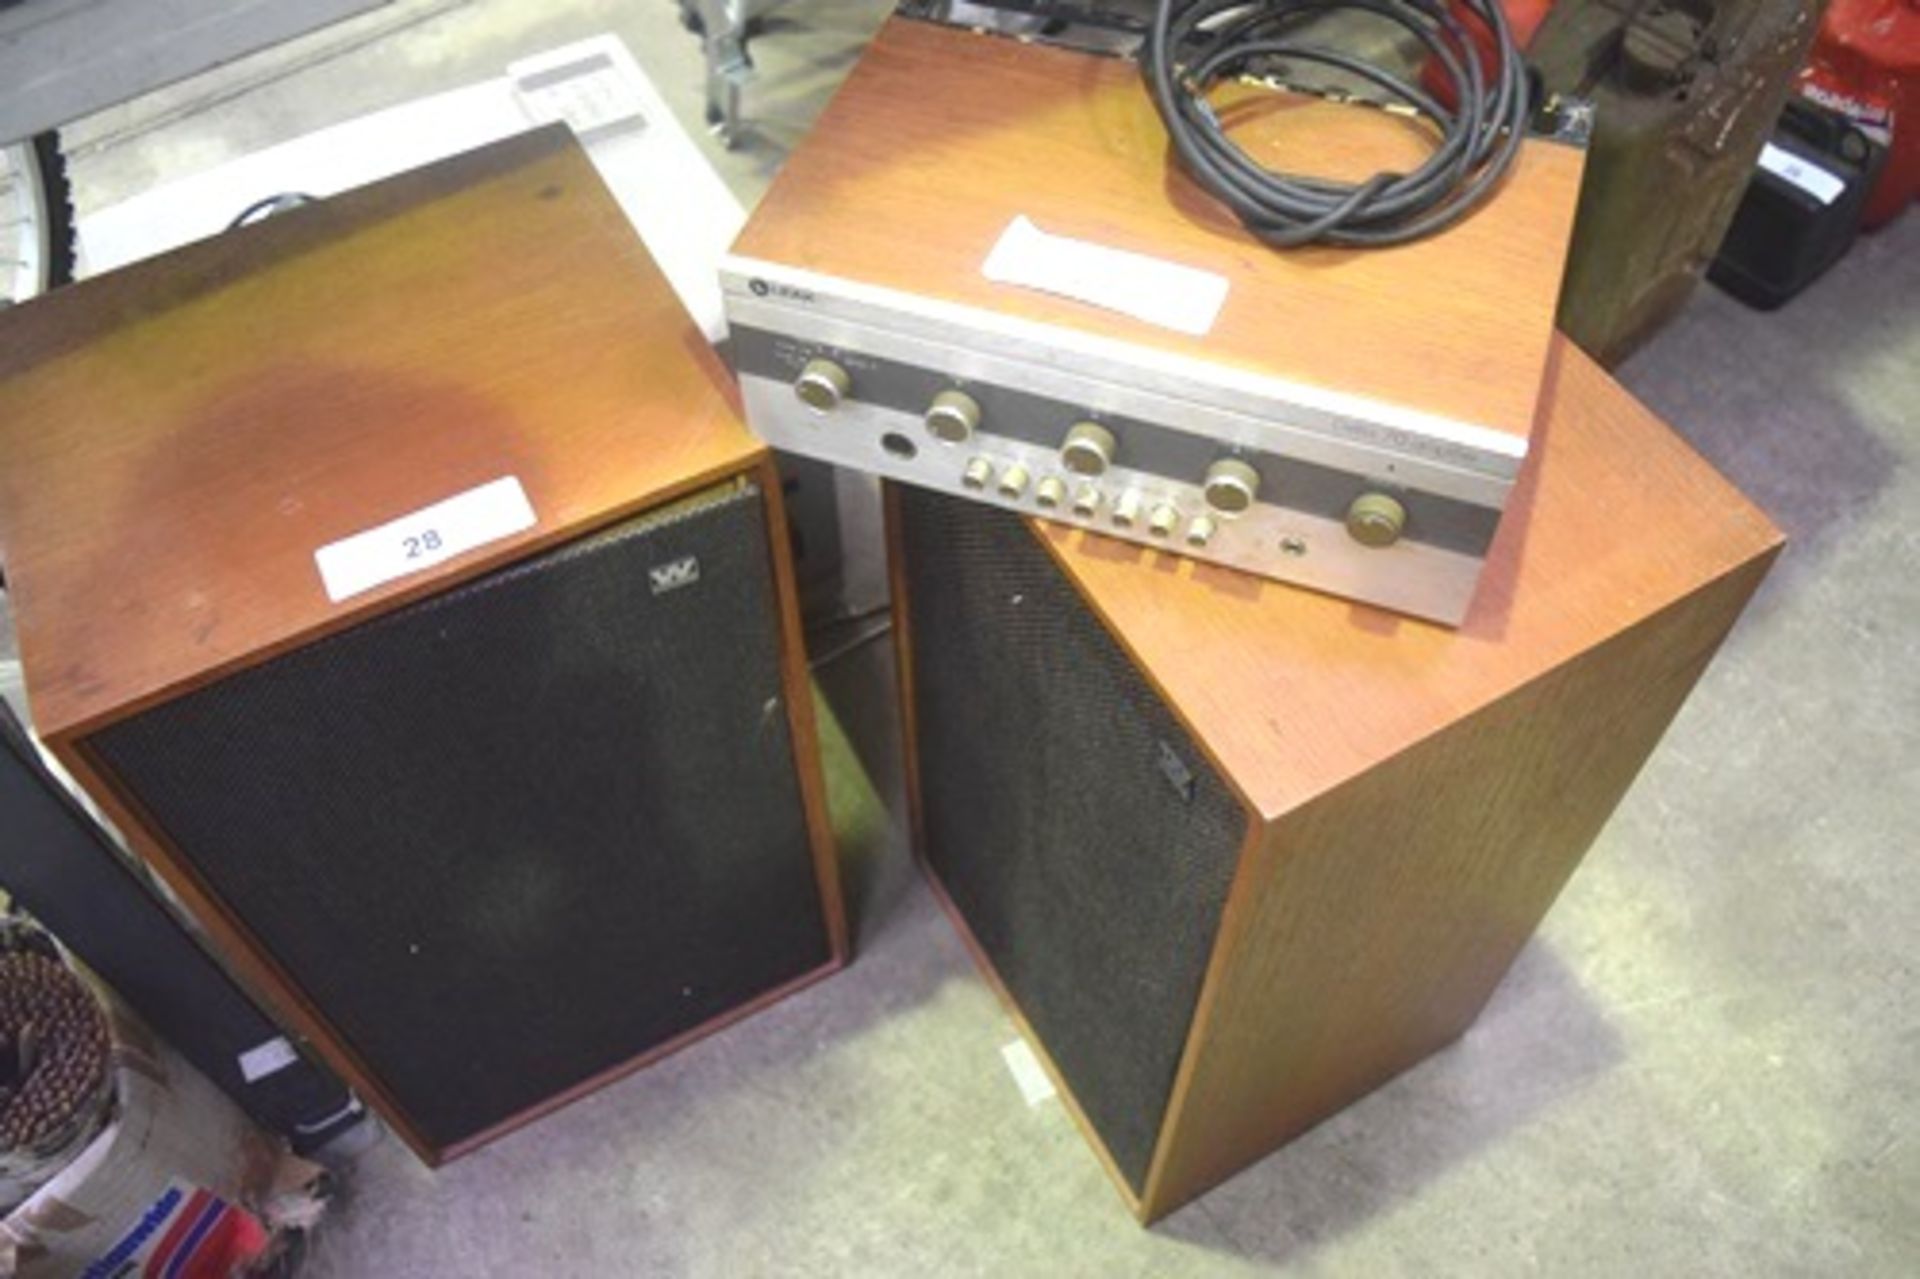 A pair of Wharfdale Dovedale 3 floor standing speakers, 36cm(W) x 30cm(D) x 61cm(H) and Leak Delta